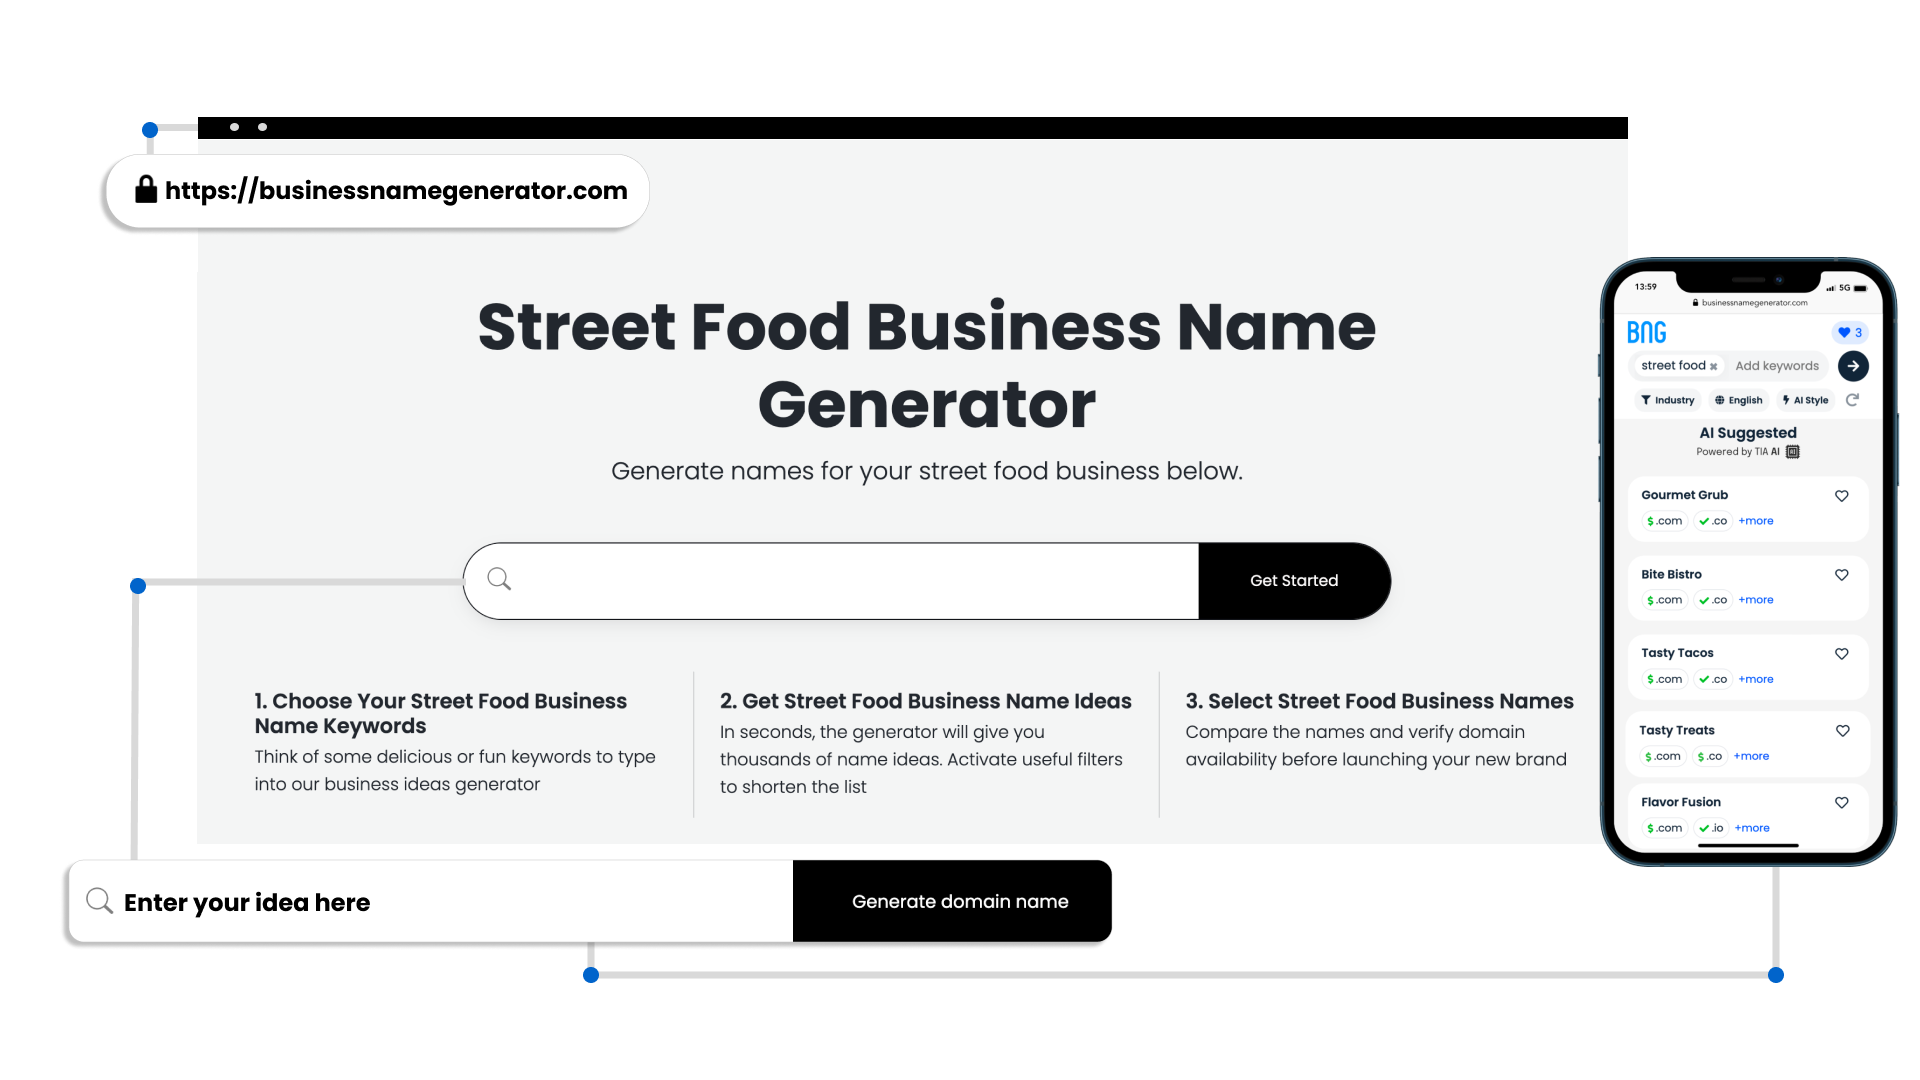 Benefits of Our Street Food Business Name Generator